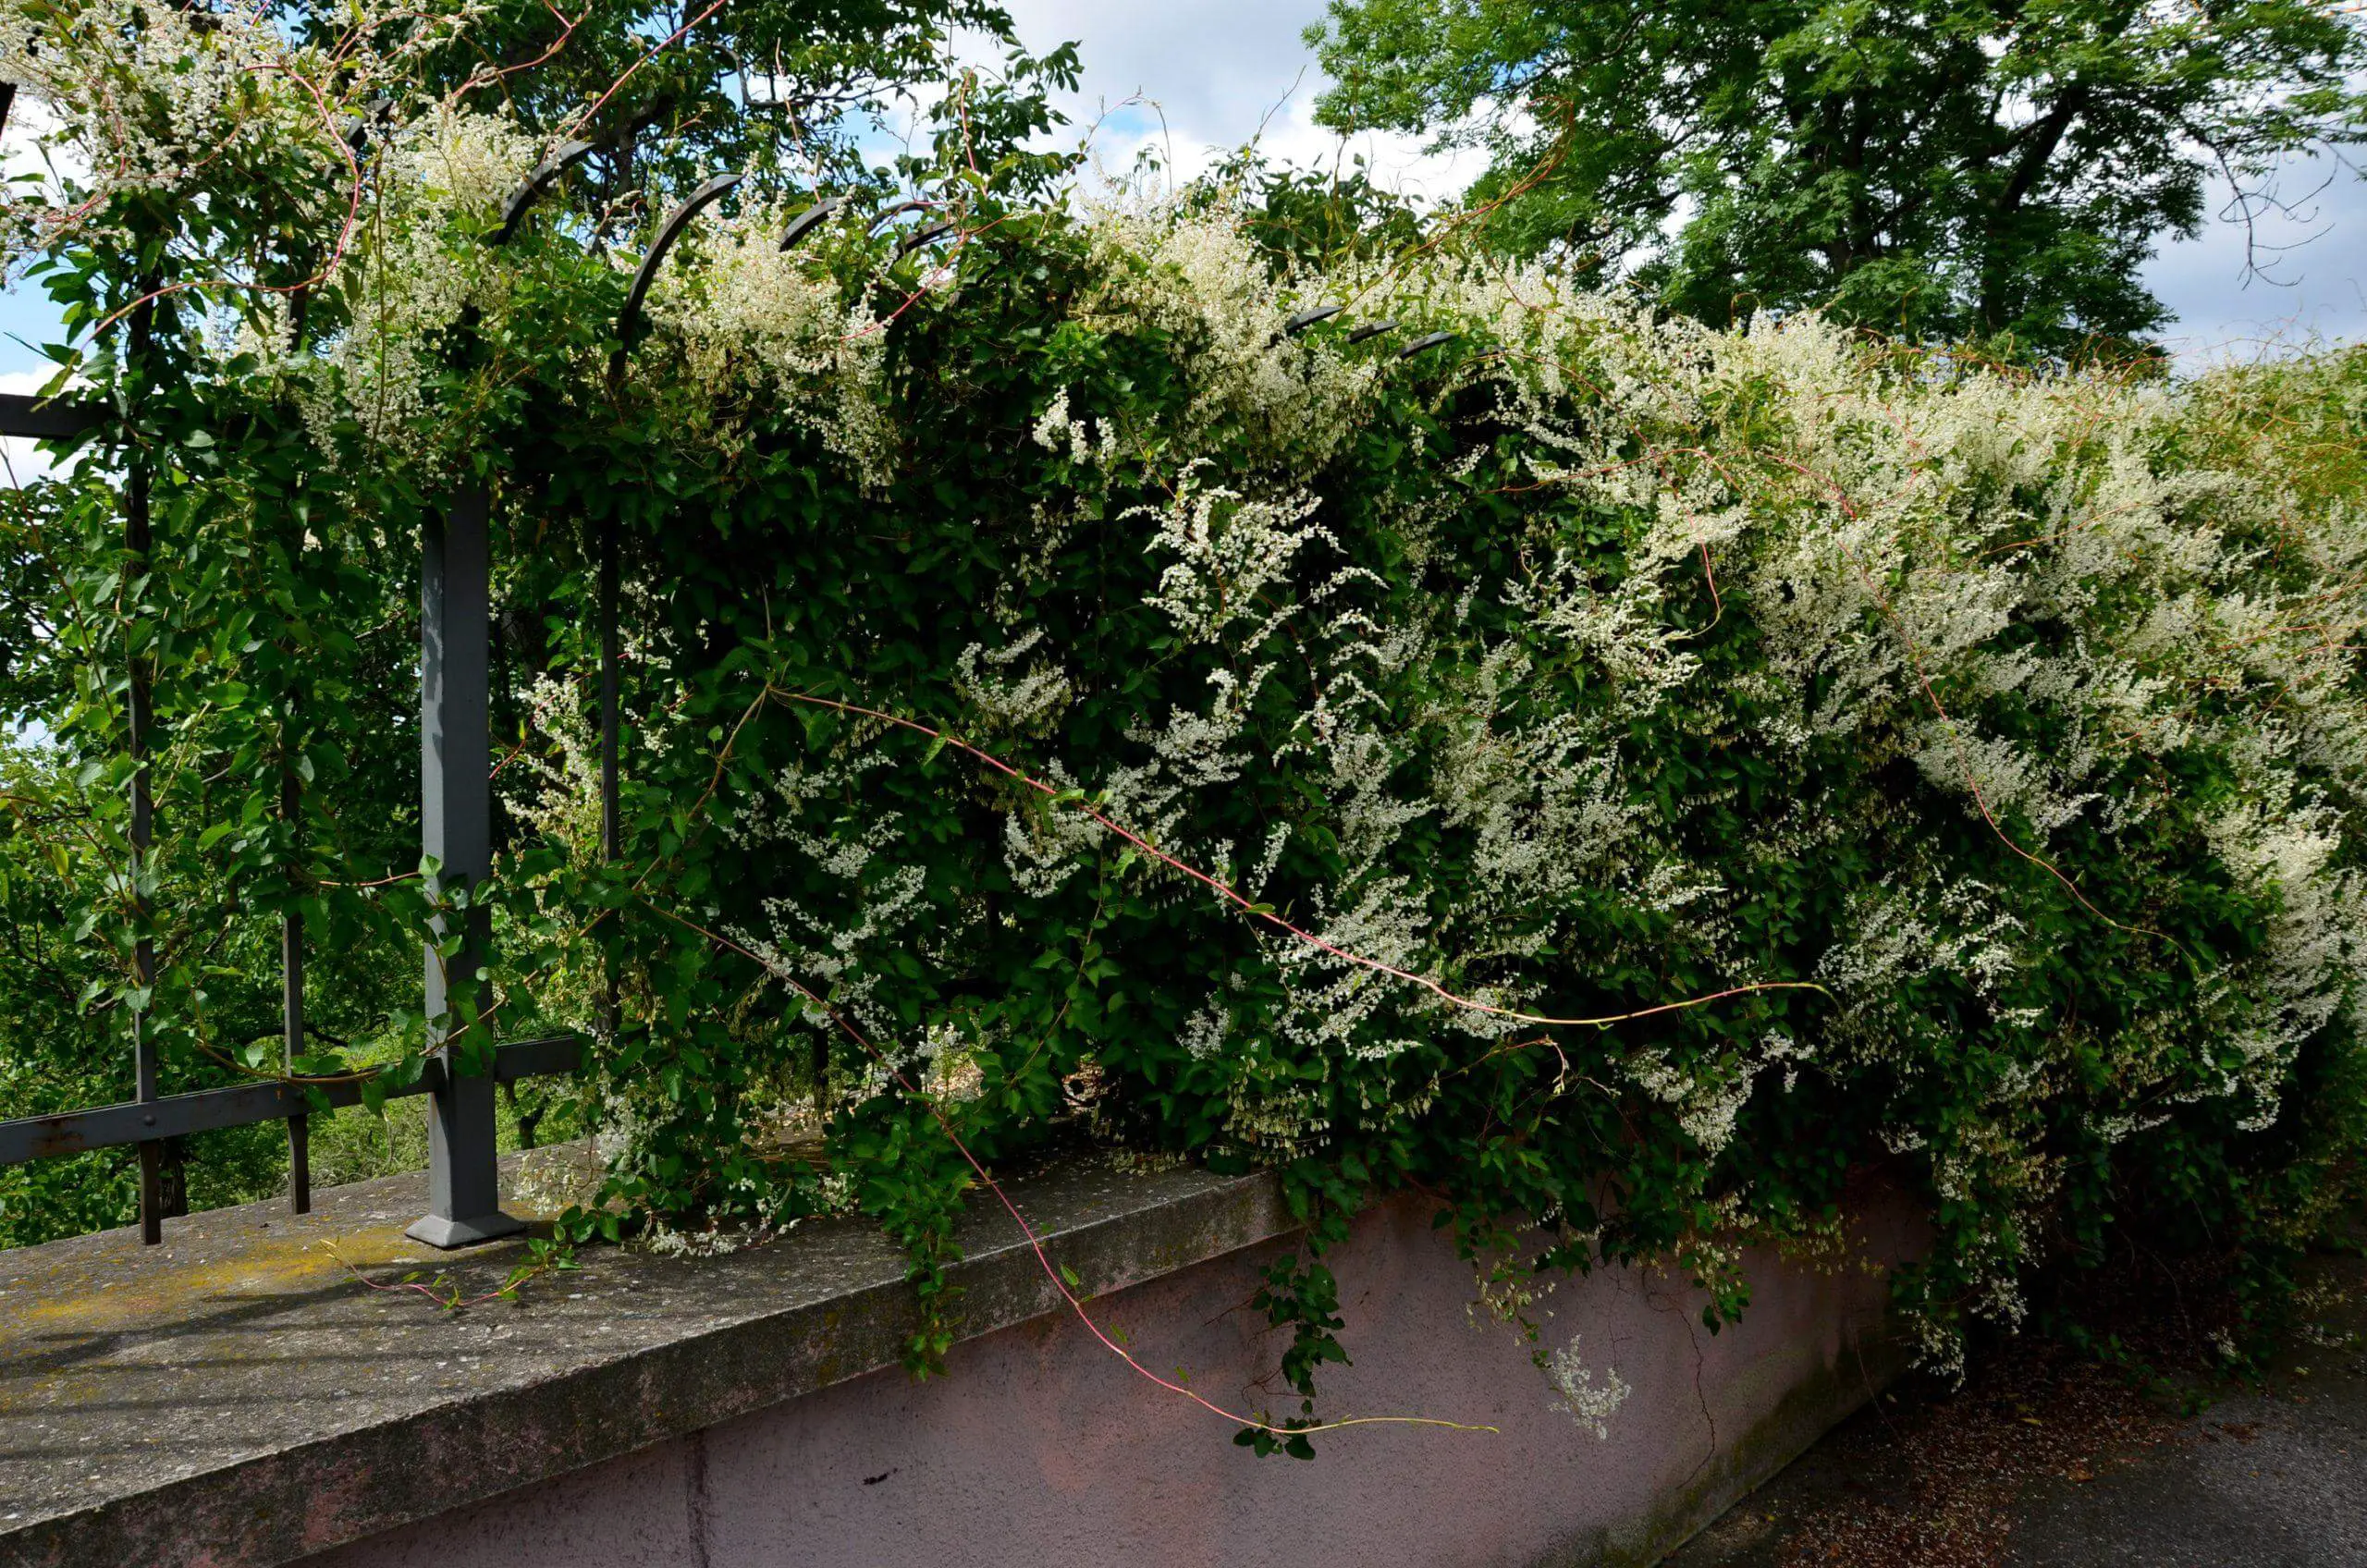 Boundary fence consumed by Russian vine and spreading uncontrollably